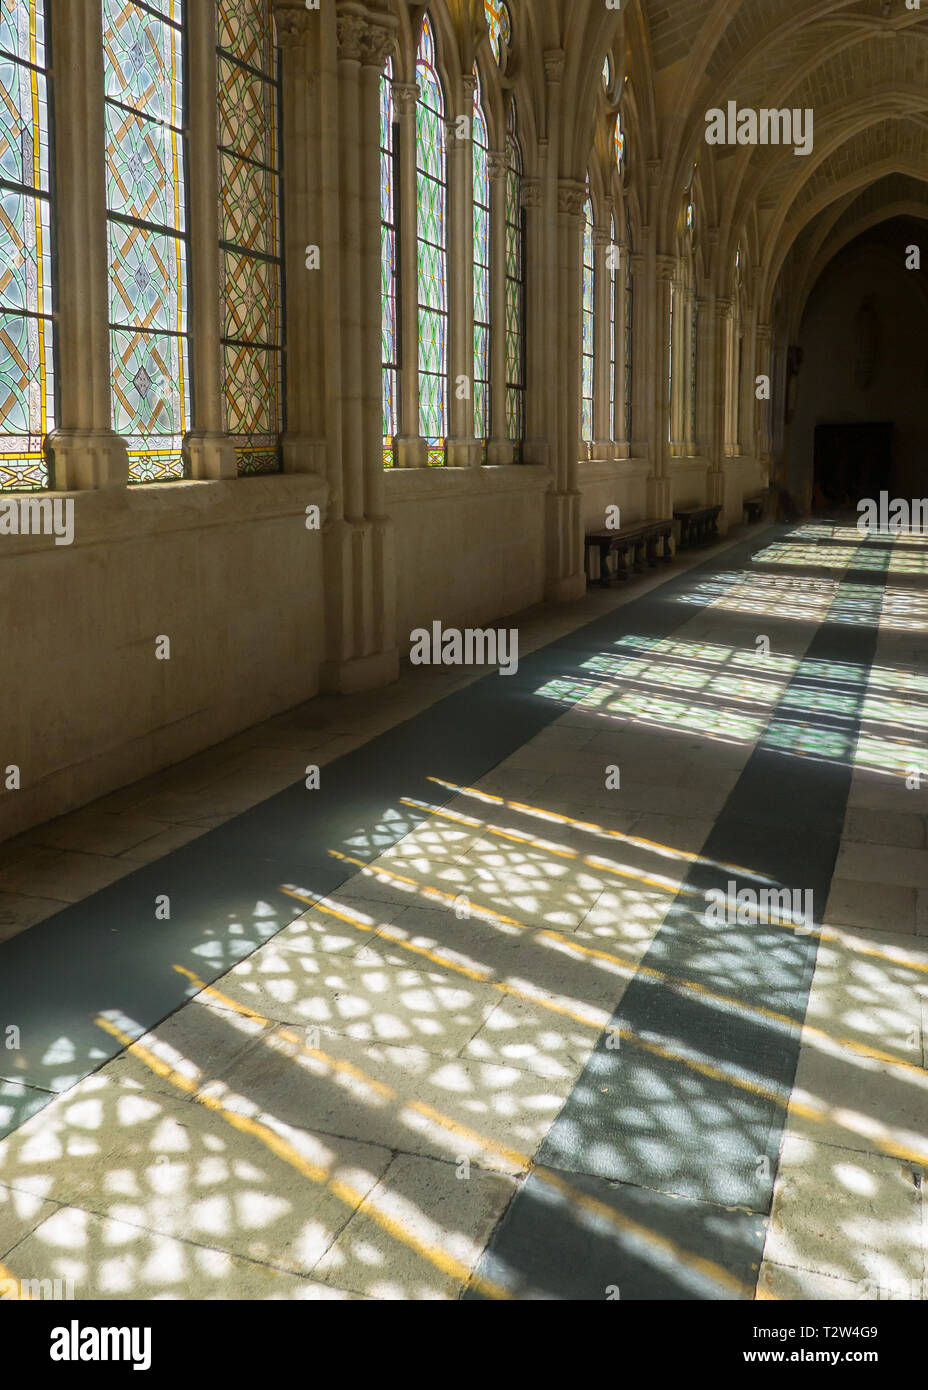 Shadows on the ground of the cloister of the cathedral in Burgos, Spain Stock Photo